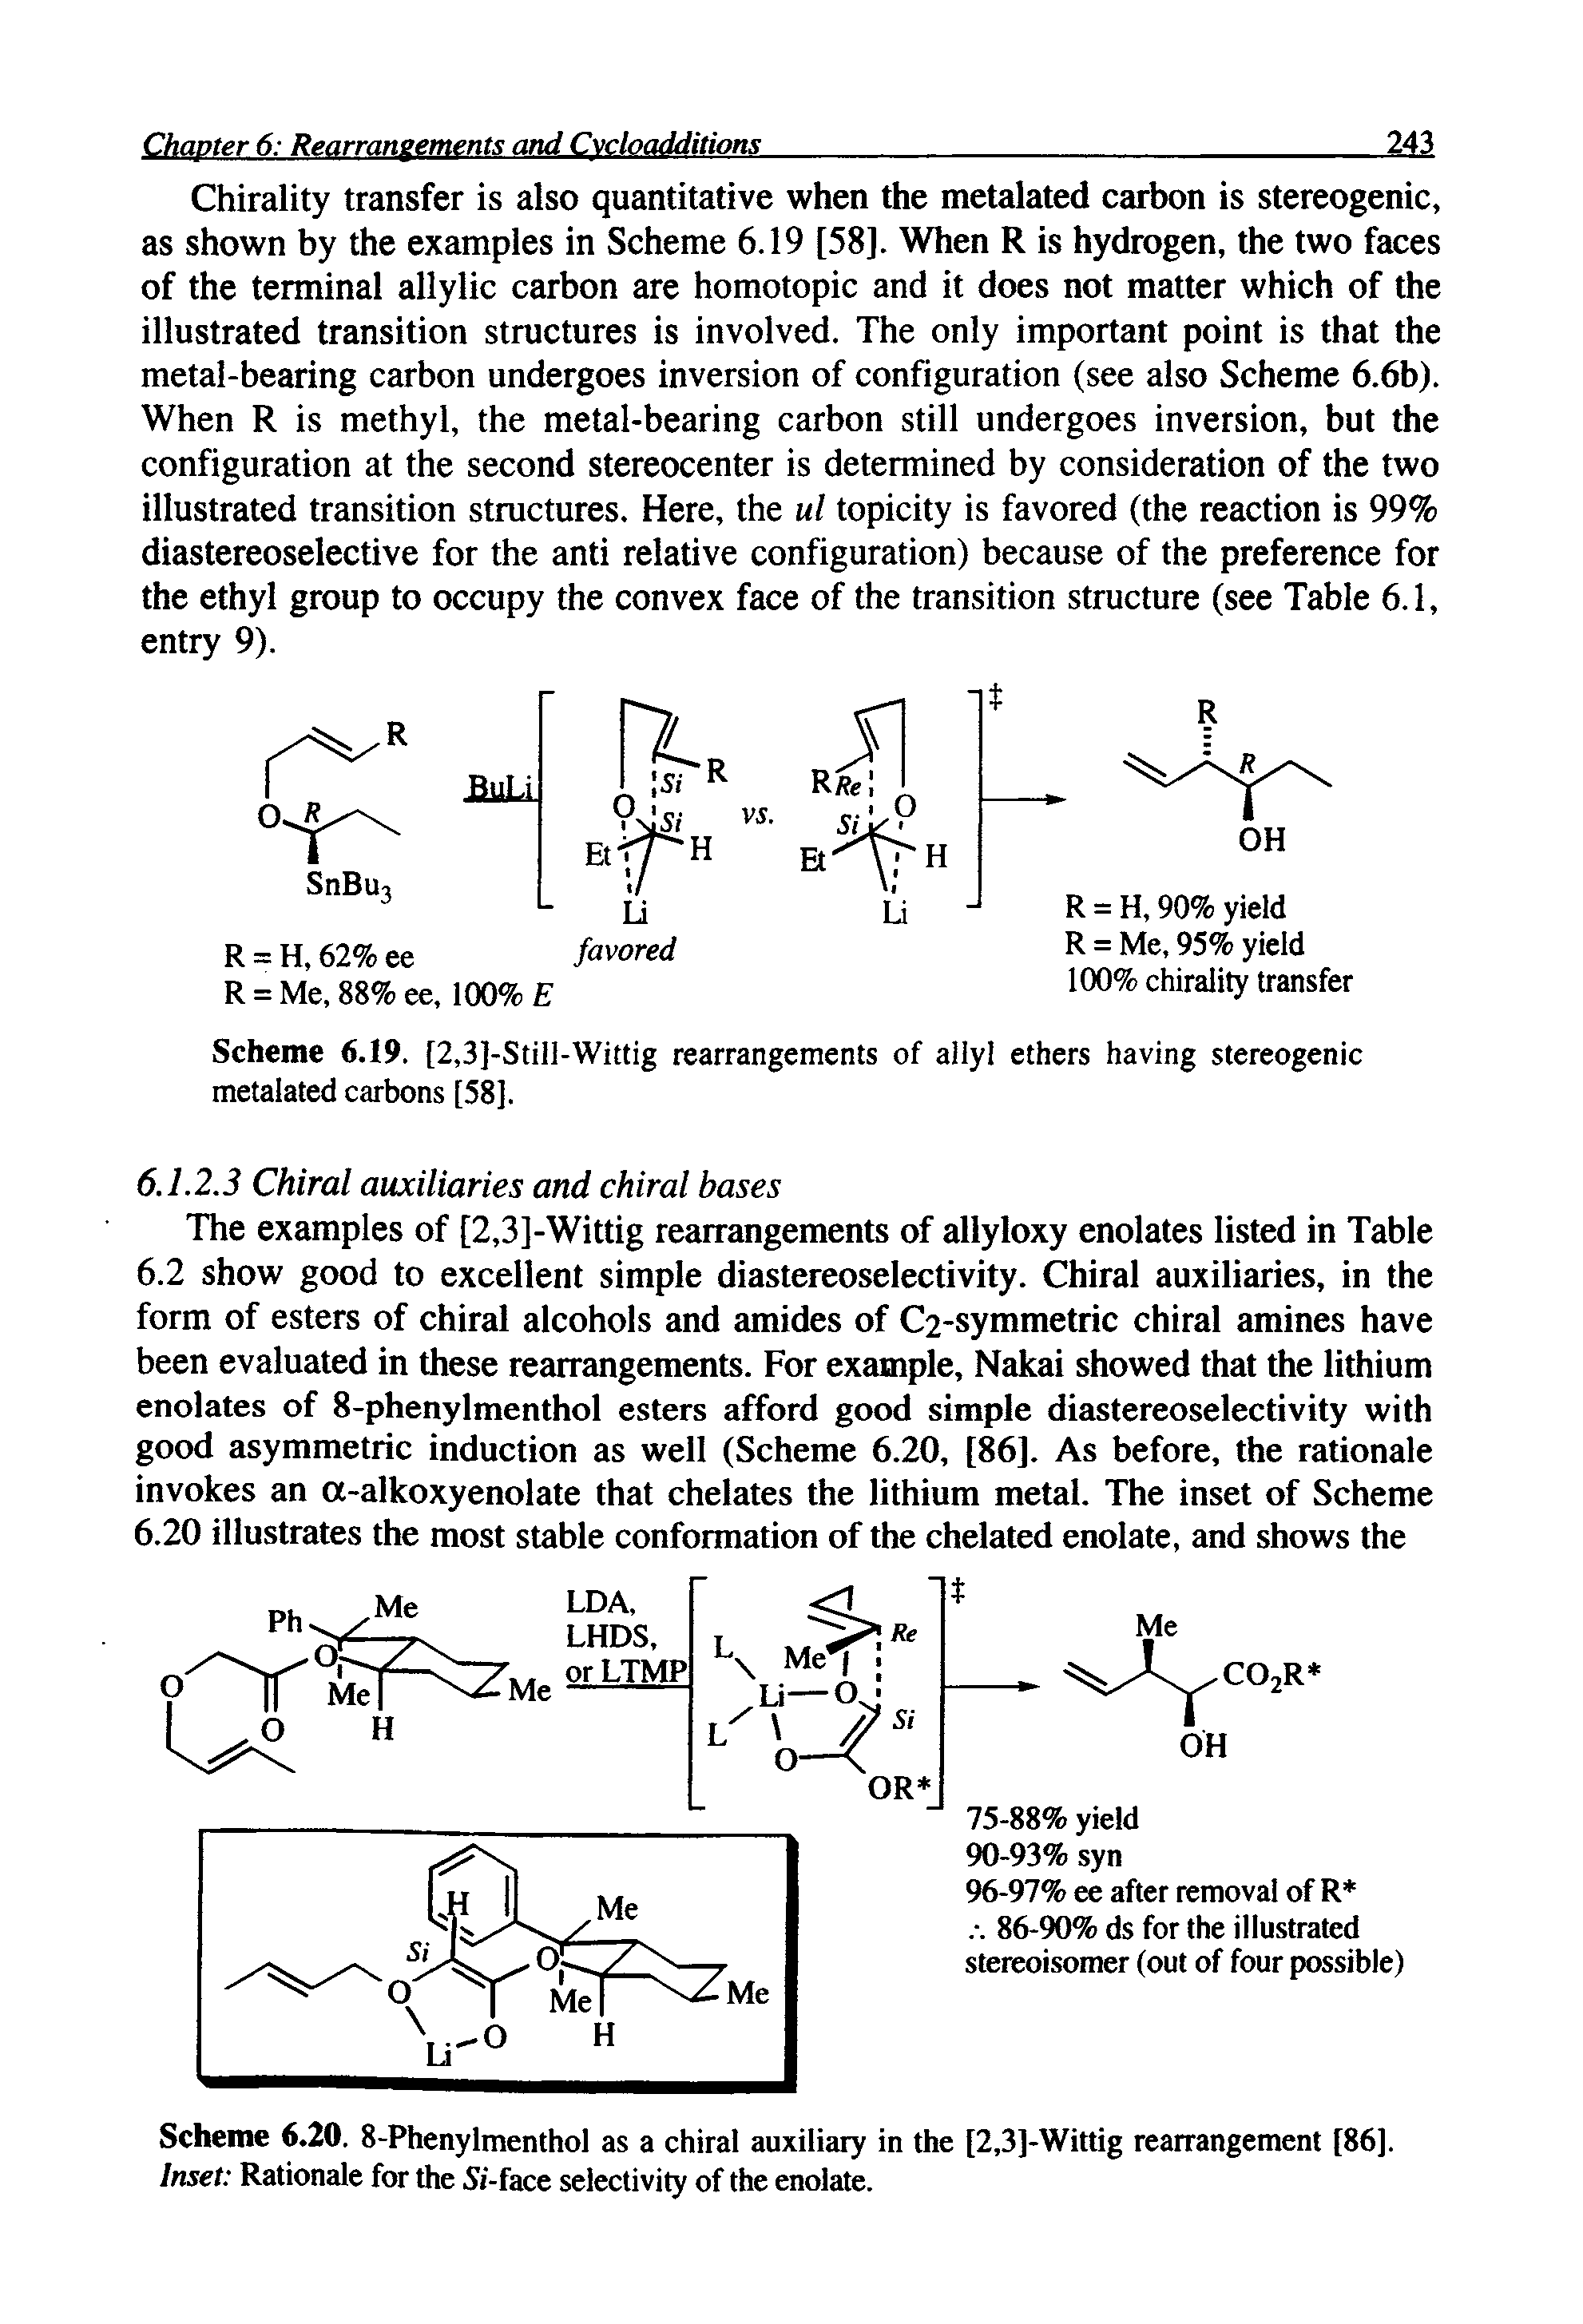 Scheme 6.20. 8-Phenylmenthol as a chiral auxiliary in the [2,3]-Wittig rearrangement [86]. Inset Rationale for the 5i-face selectivity of the enolate.